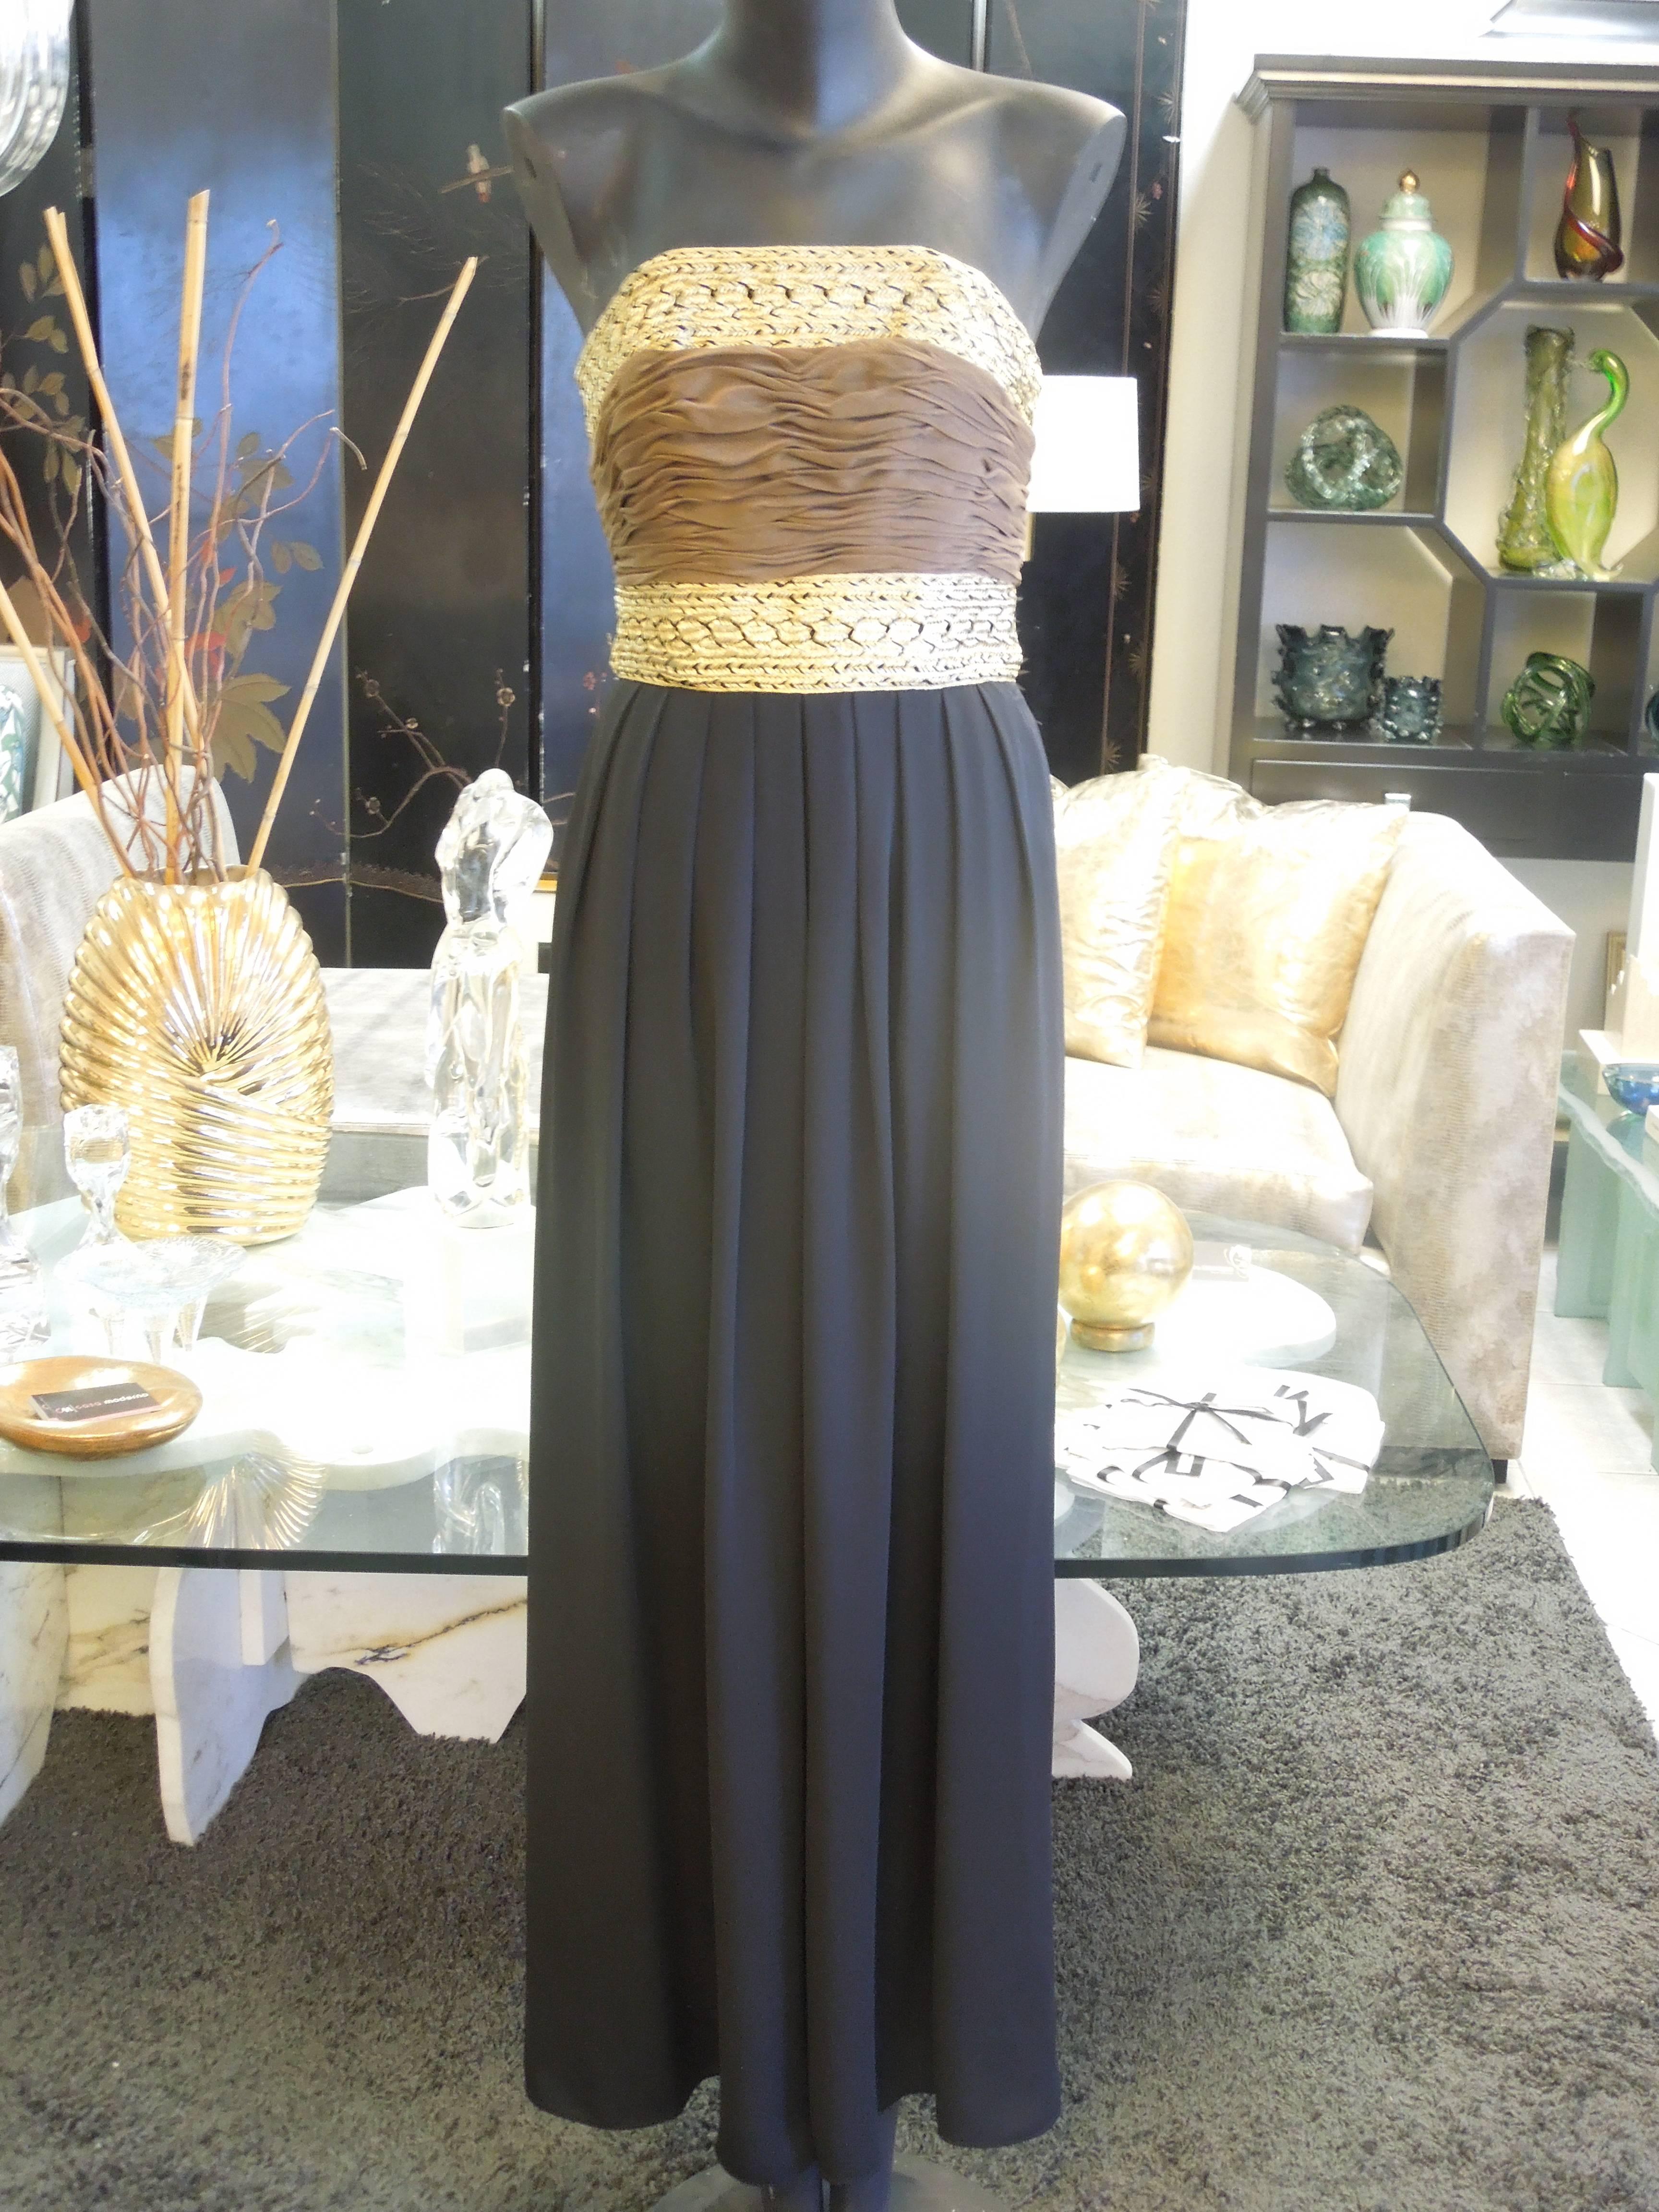 It's a beautiful evening ensemble by designer Liancarlo for Saks Fifth Avenue. The staples jumpsuit has a beautiful gold metallic graded bodice with cocoa colored rusted chiffon across the front. Pants are wide pleated black chiffon. Very Chic. To